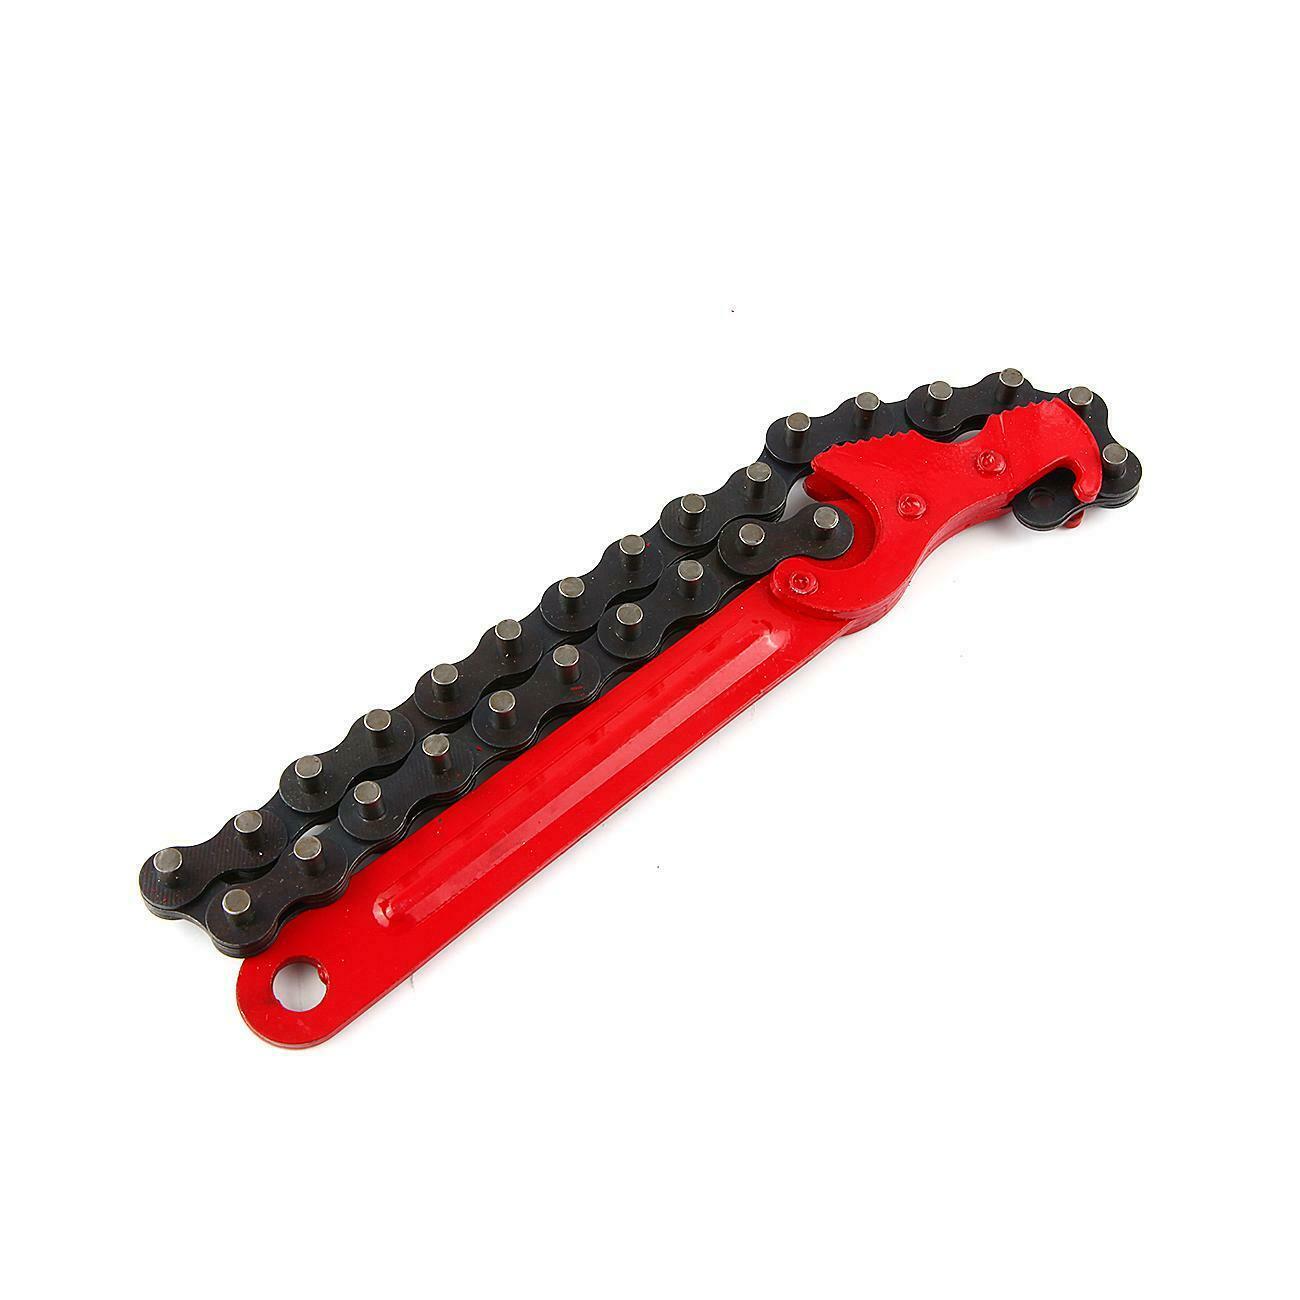 Multi-Purpose Oil Fuel Filter Canister Chain Strap Opener Wrench Remover Tool 16 inch (420mm) Adjustable Chain and 8 inch (215mm) Steel Handle Grip